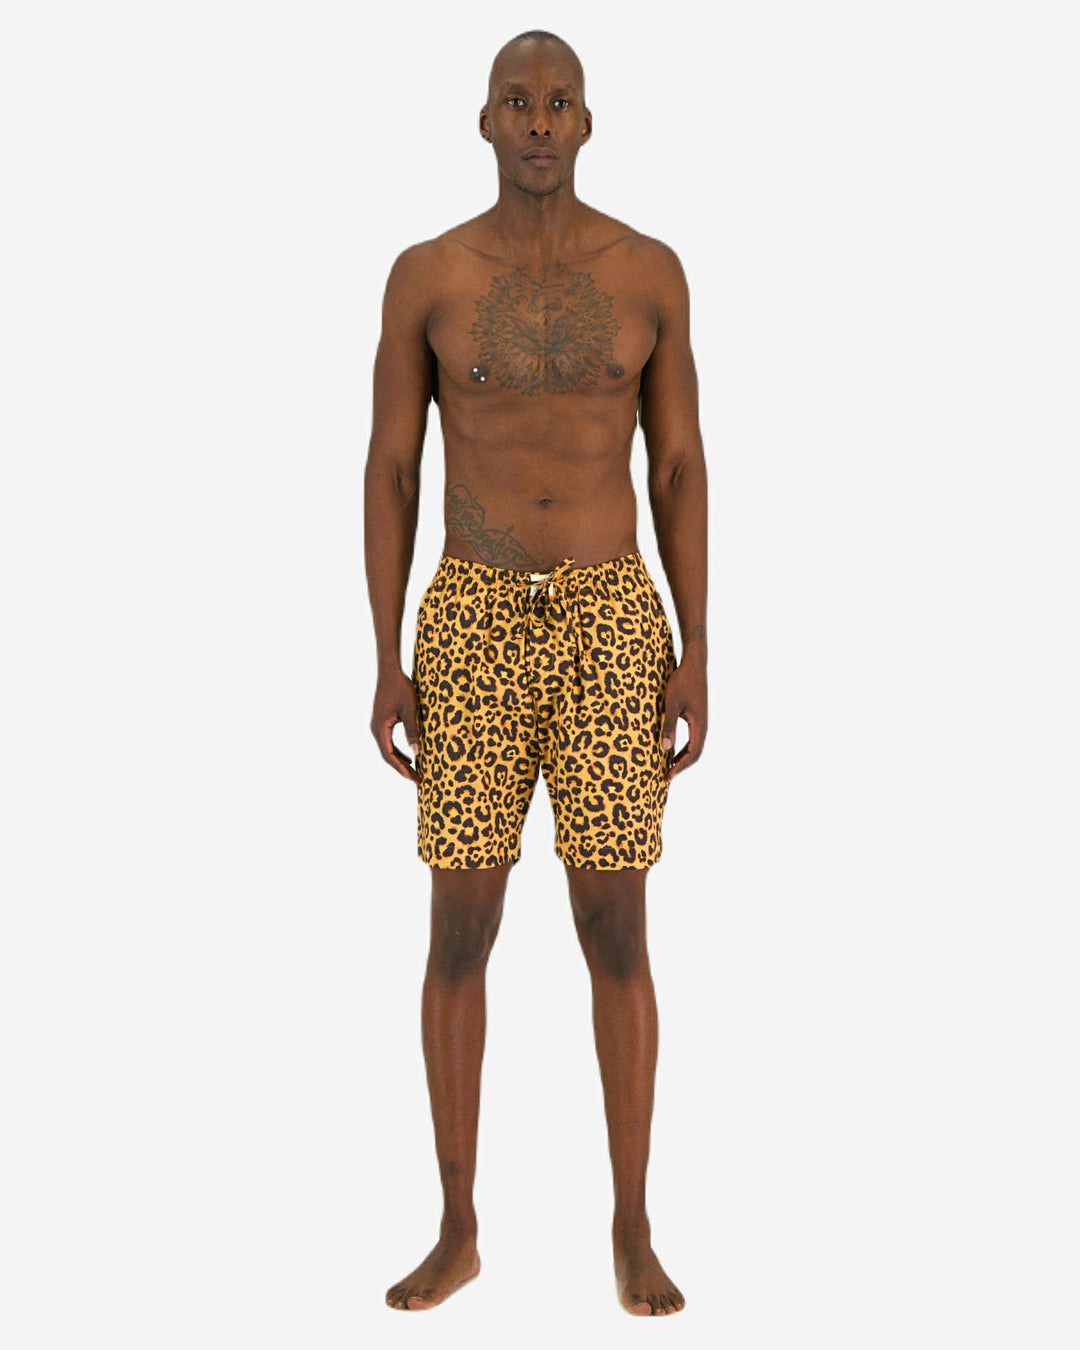 Mens lounge shorts with a leopard skin pattern